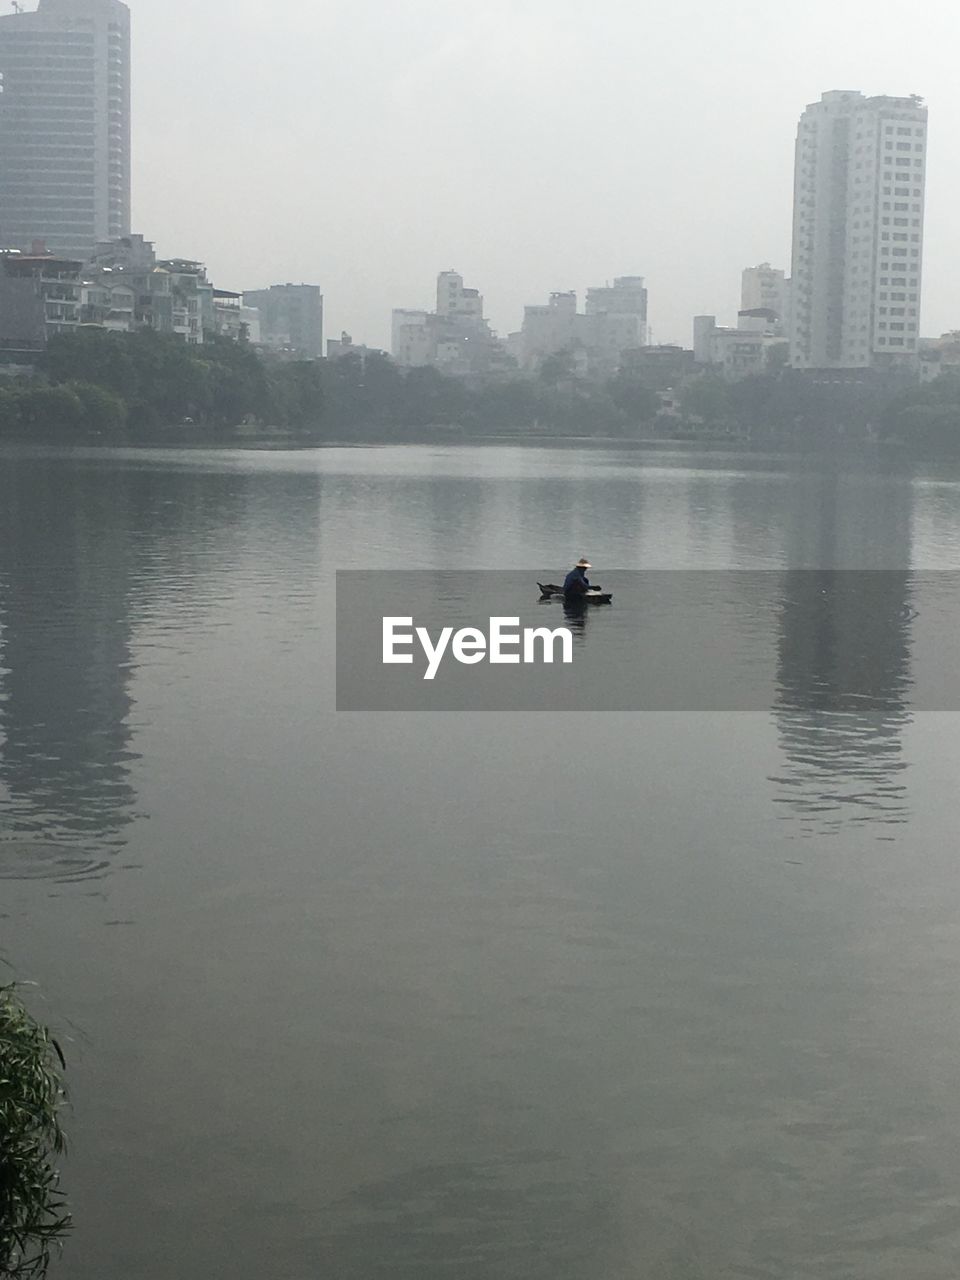 SCENIC VIEW OF RIVER IN CITY